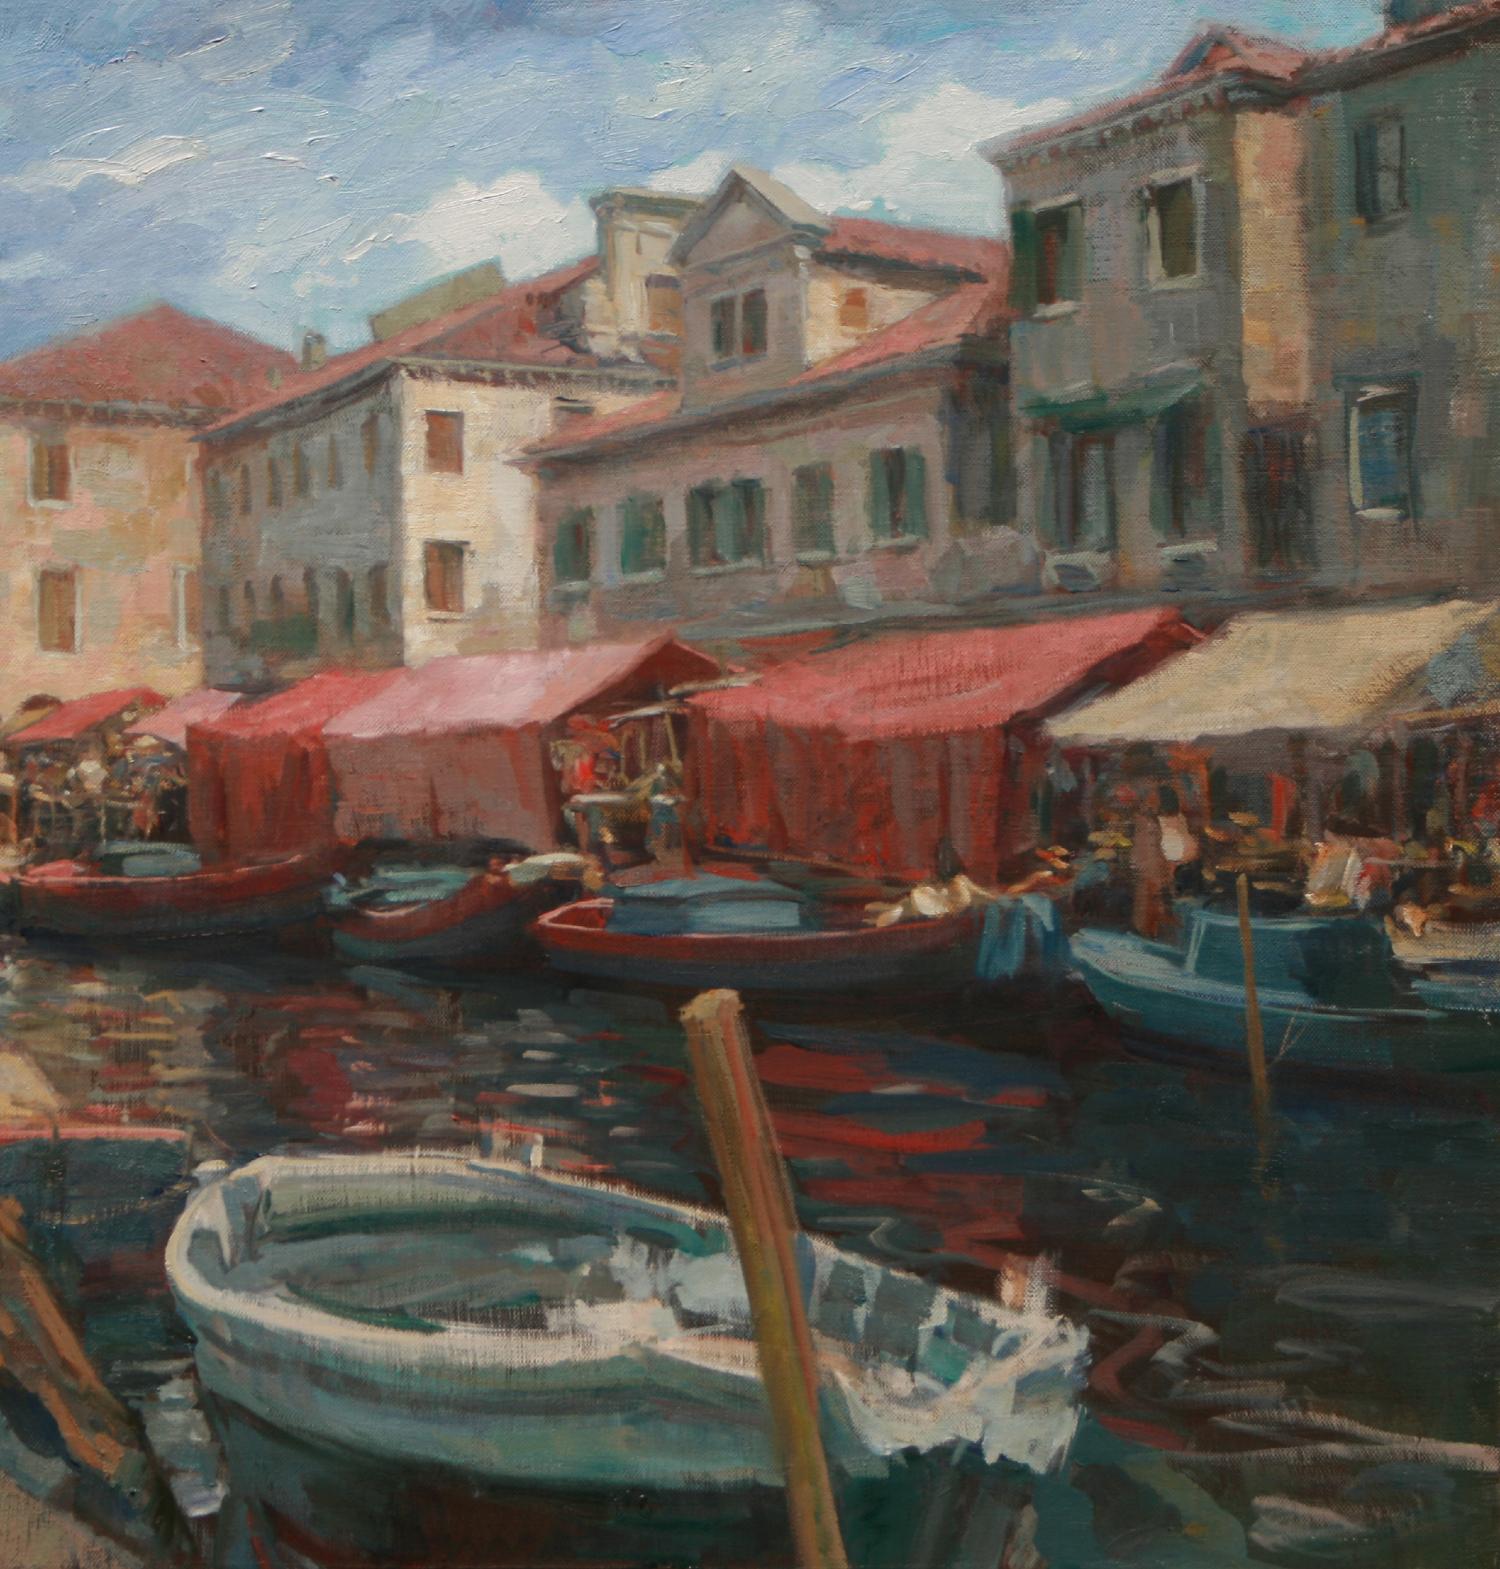 Venetian Canal was painted in 2023 for an exhibition at Jack Meier Gallery in Houston, TX by William Kalwick. The artist did a study on one of the canals in Venice and William Kalwick did this painting in his studio in Houston. Venetian Canal is a